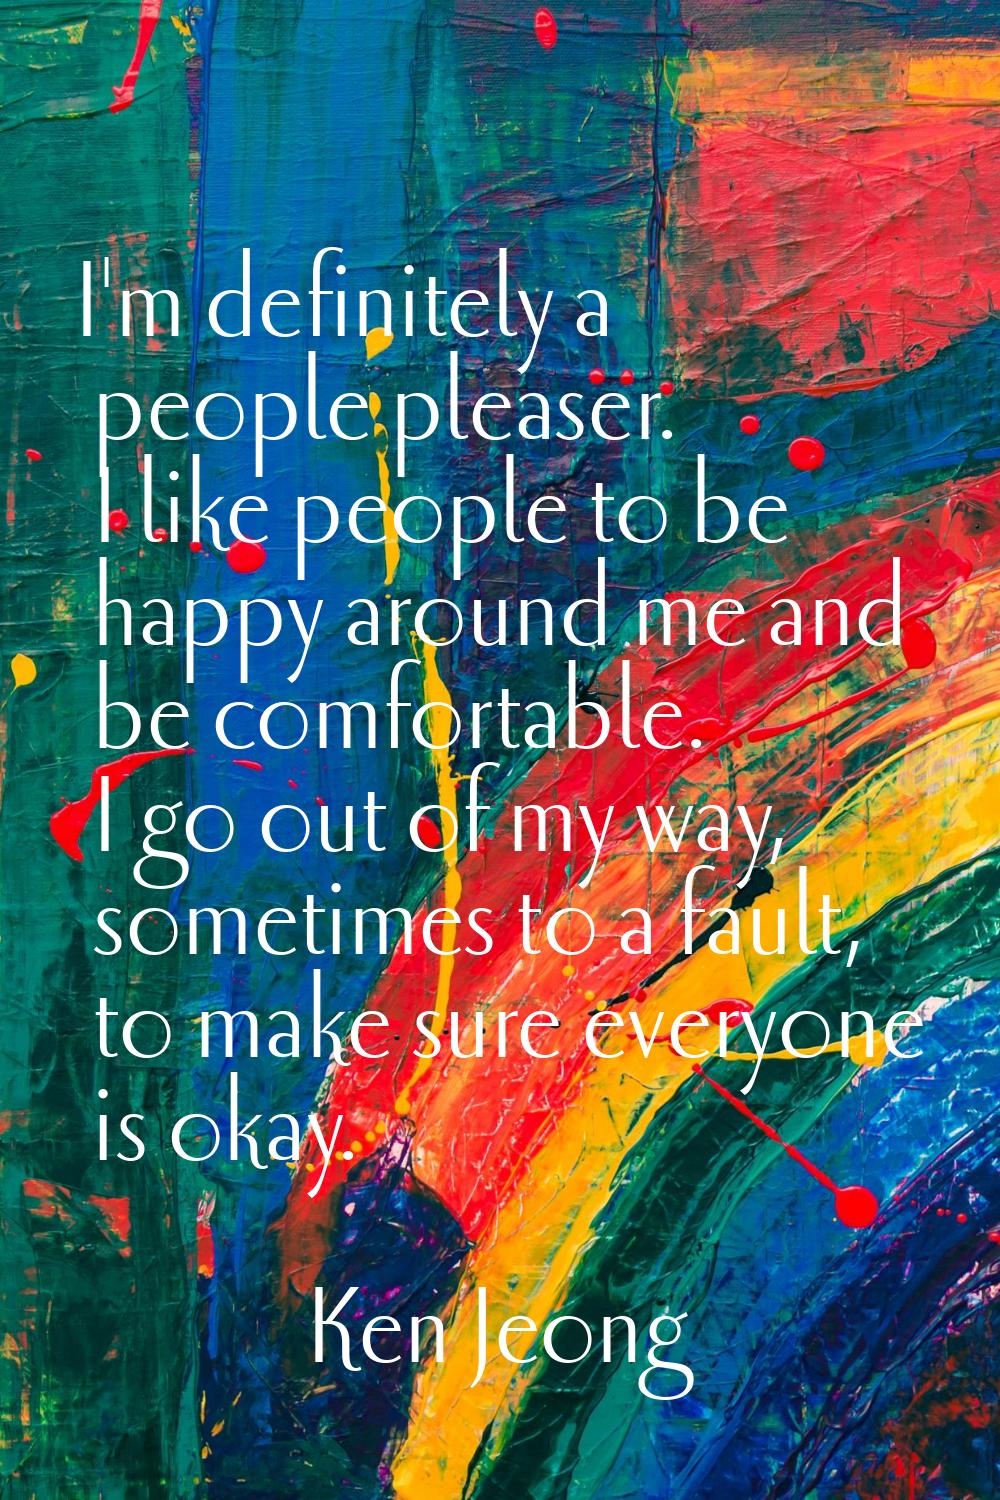 I'm definitely a people pleaser. I like people to be happy around me and be comfortable. I go out o